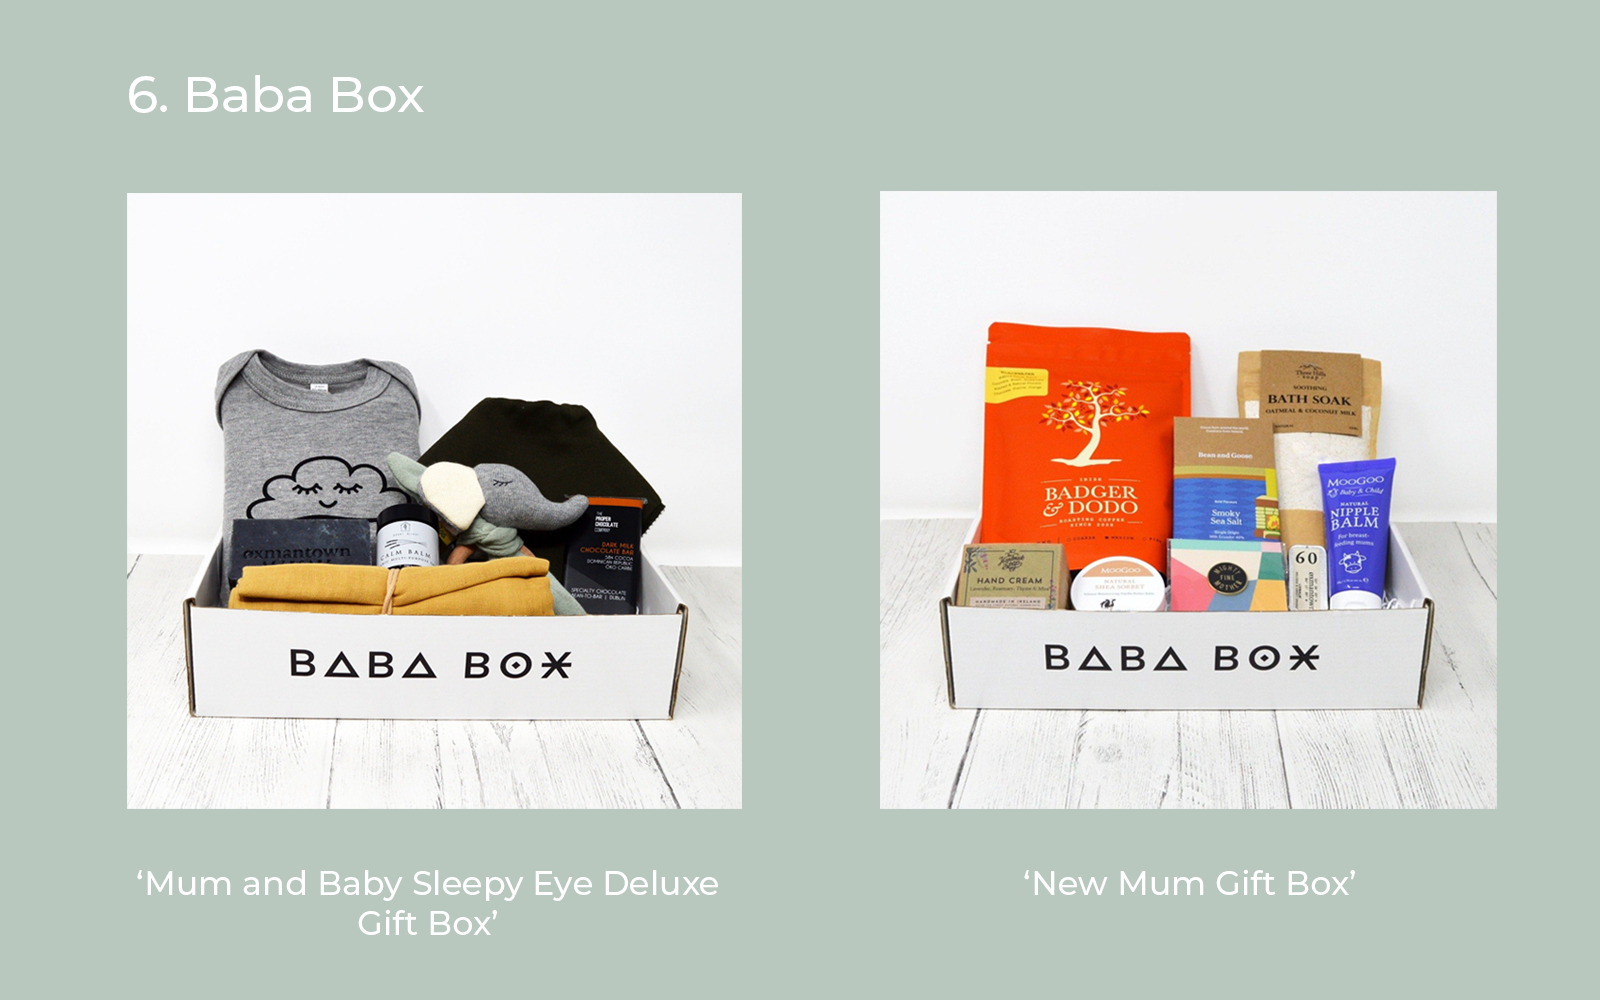 Baba Box Gifts for New Mums Lulu and belle